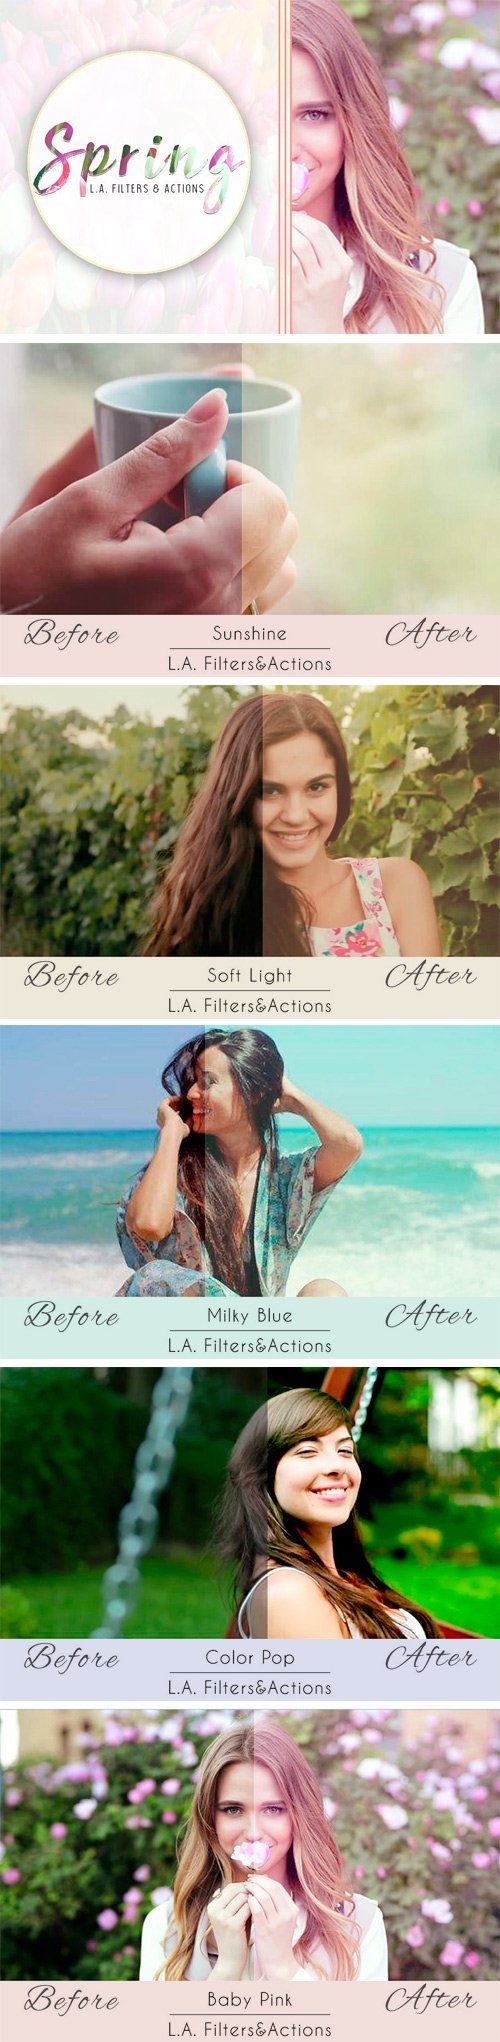 Spring - Photoshop Actions 2222334